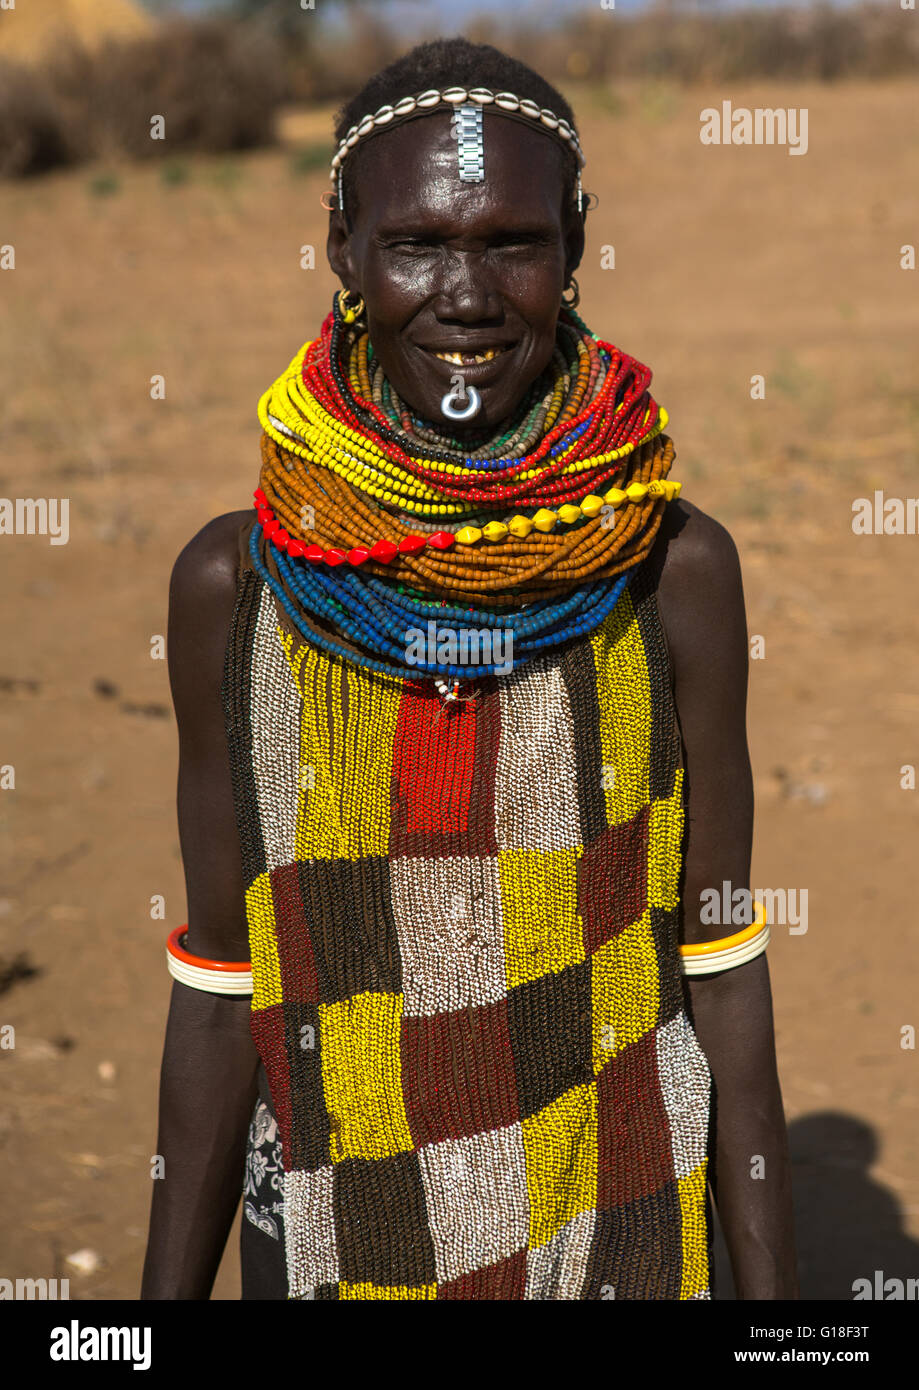 Murle tribe woman with a beaded apron and necklaces, Omo valley, Kangate, Ethiopia Stock Photo